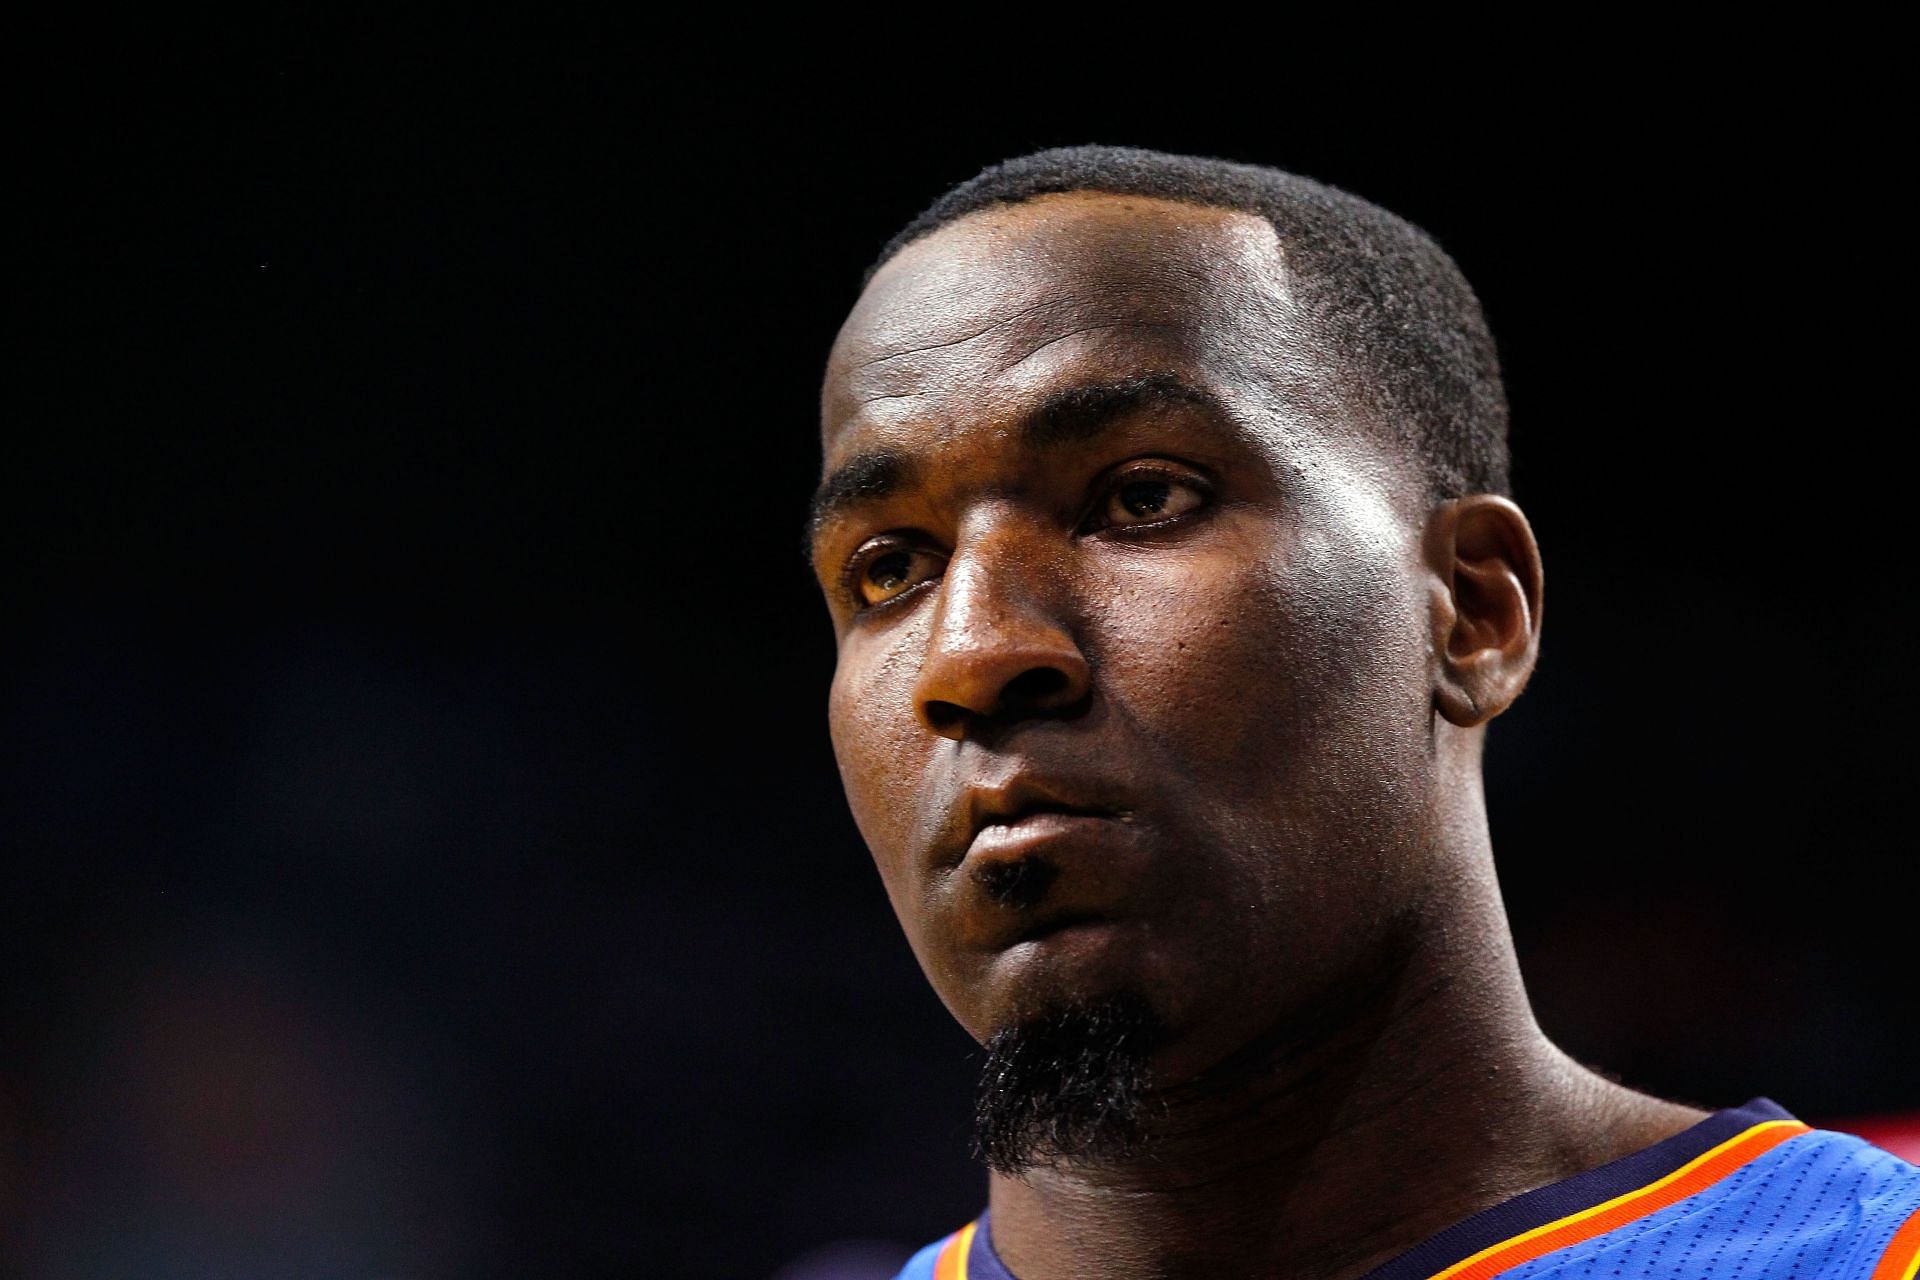 Kendrick Perkins has been criticized for his dog-breeding business